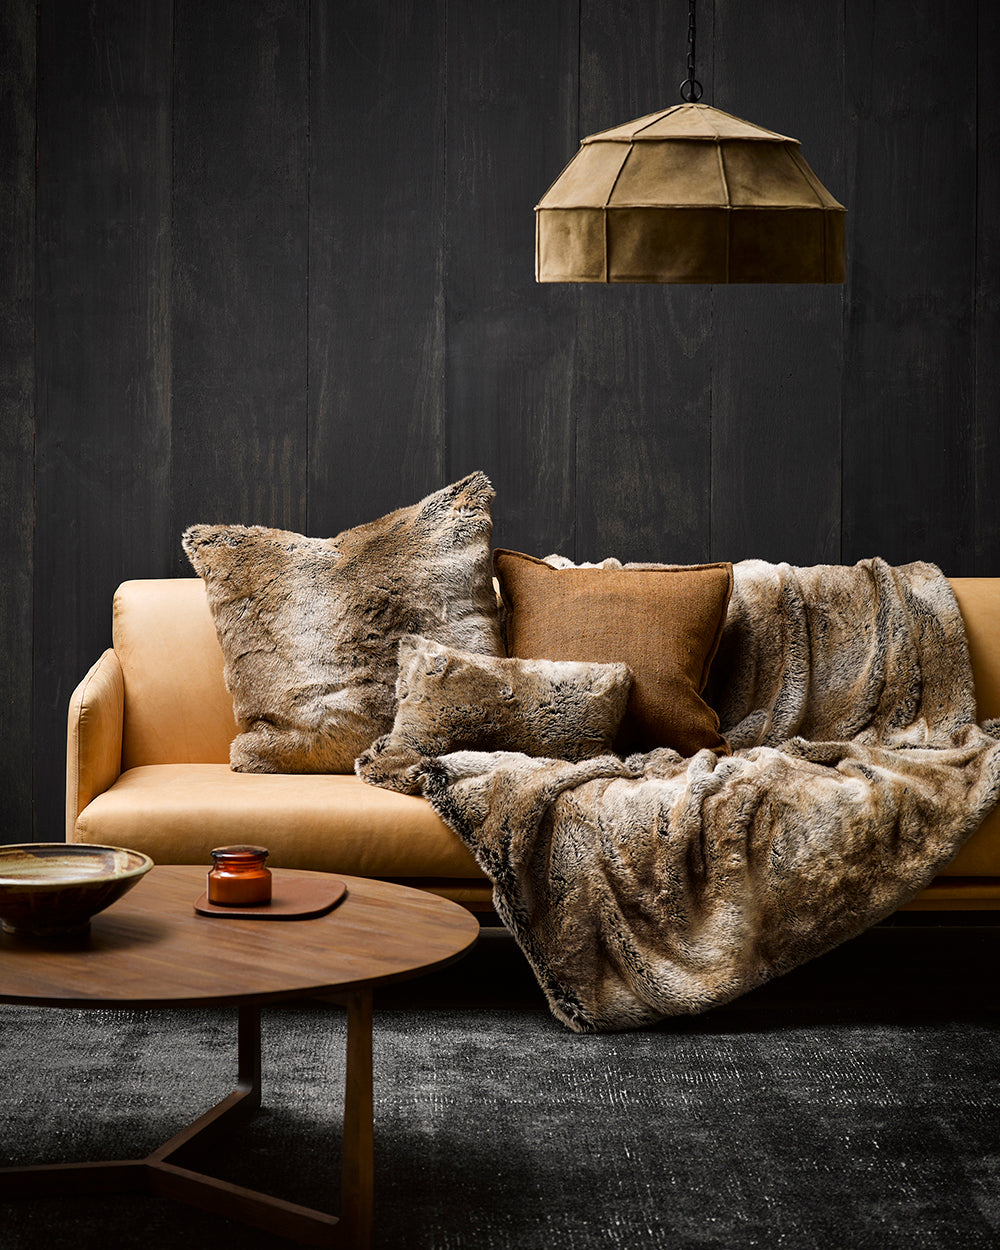 Heirloom Sable Cushions in Faux Fur are available from Make Your House A Home Premium Stockist. Furniture Store Bendigo, Victoria. Australia Wide Delivery. Furtex Baya.